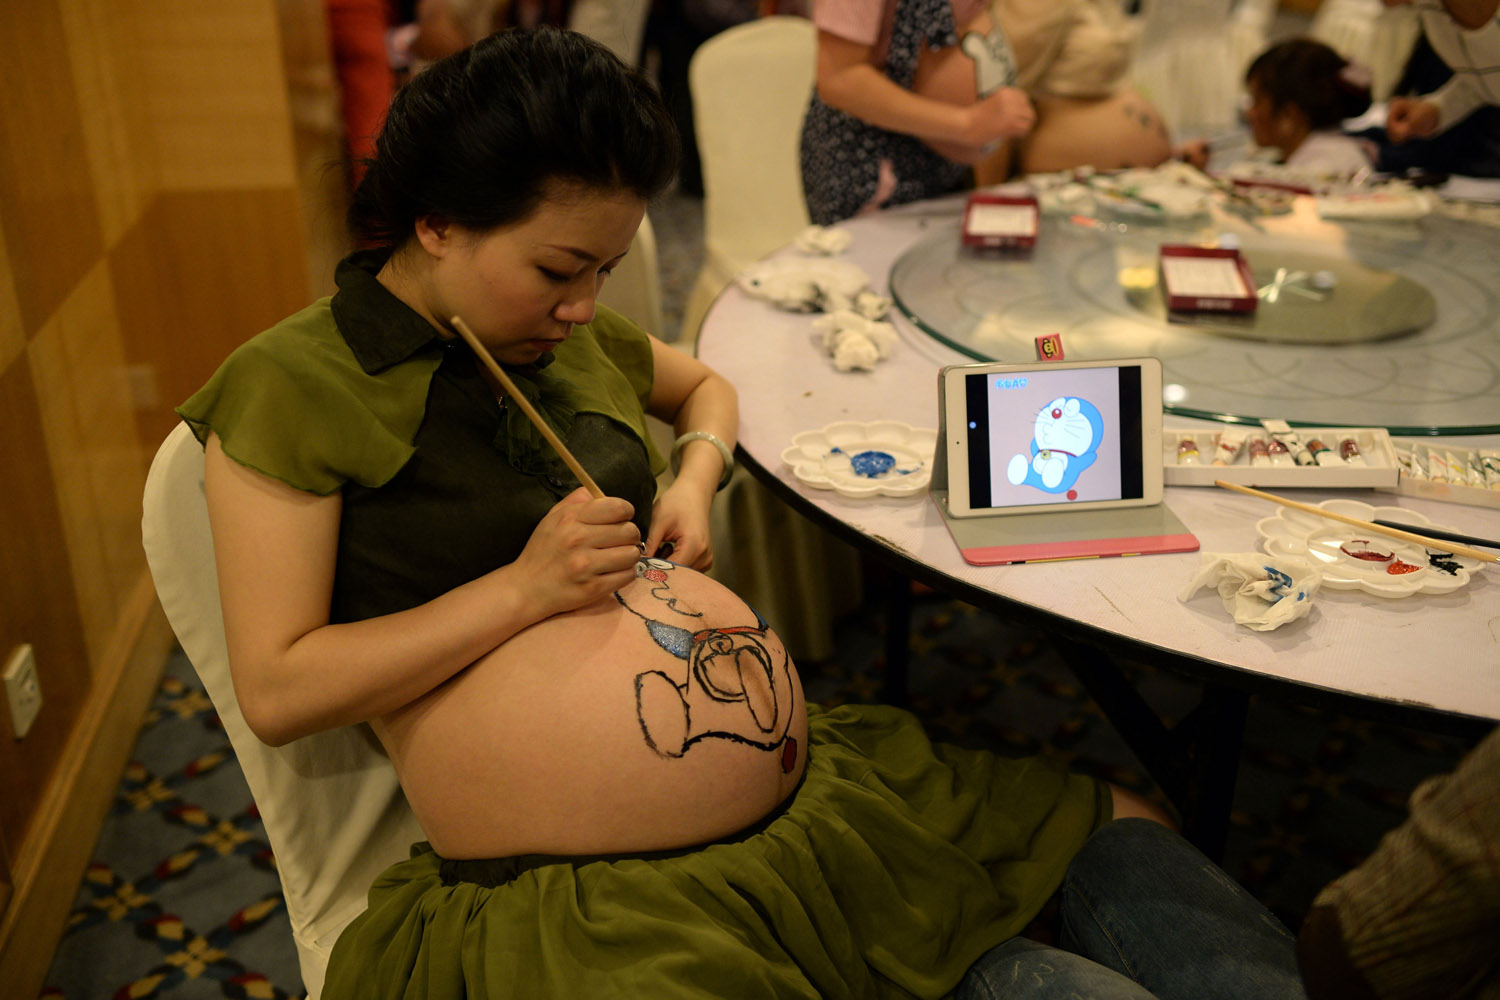 PREGNANT LADIES GET BABY BUMP PAINTED IN CHINA